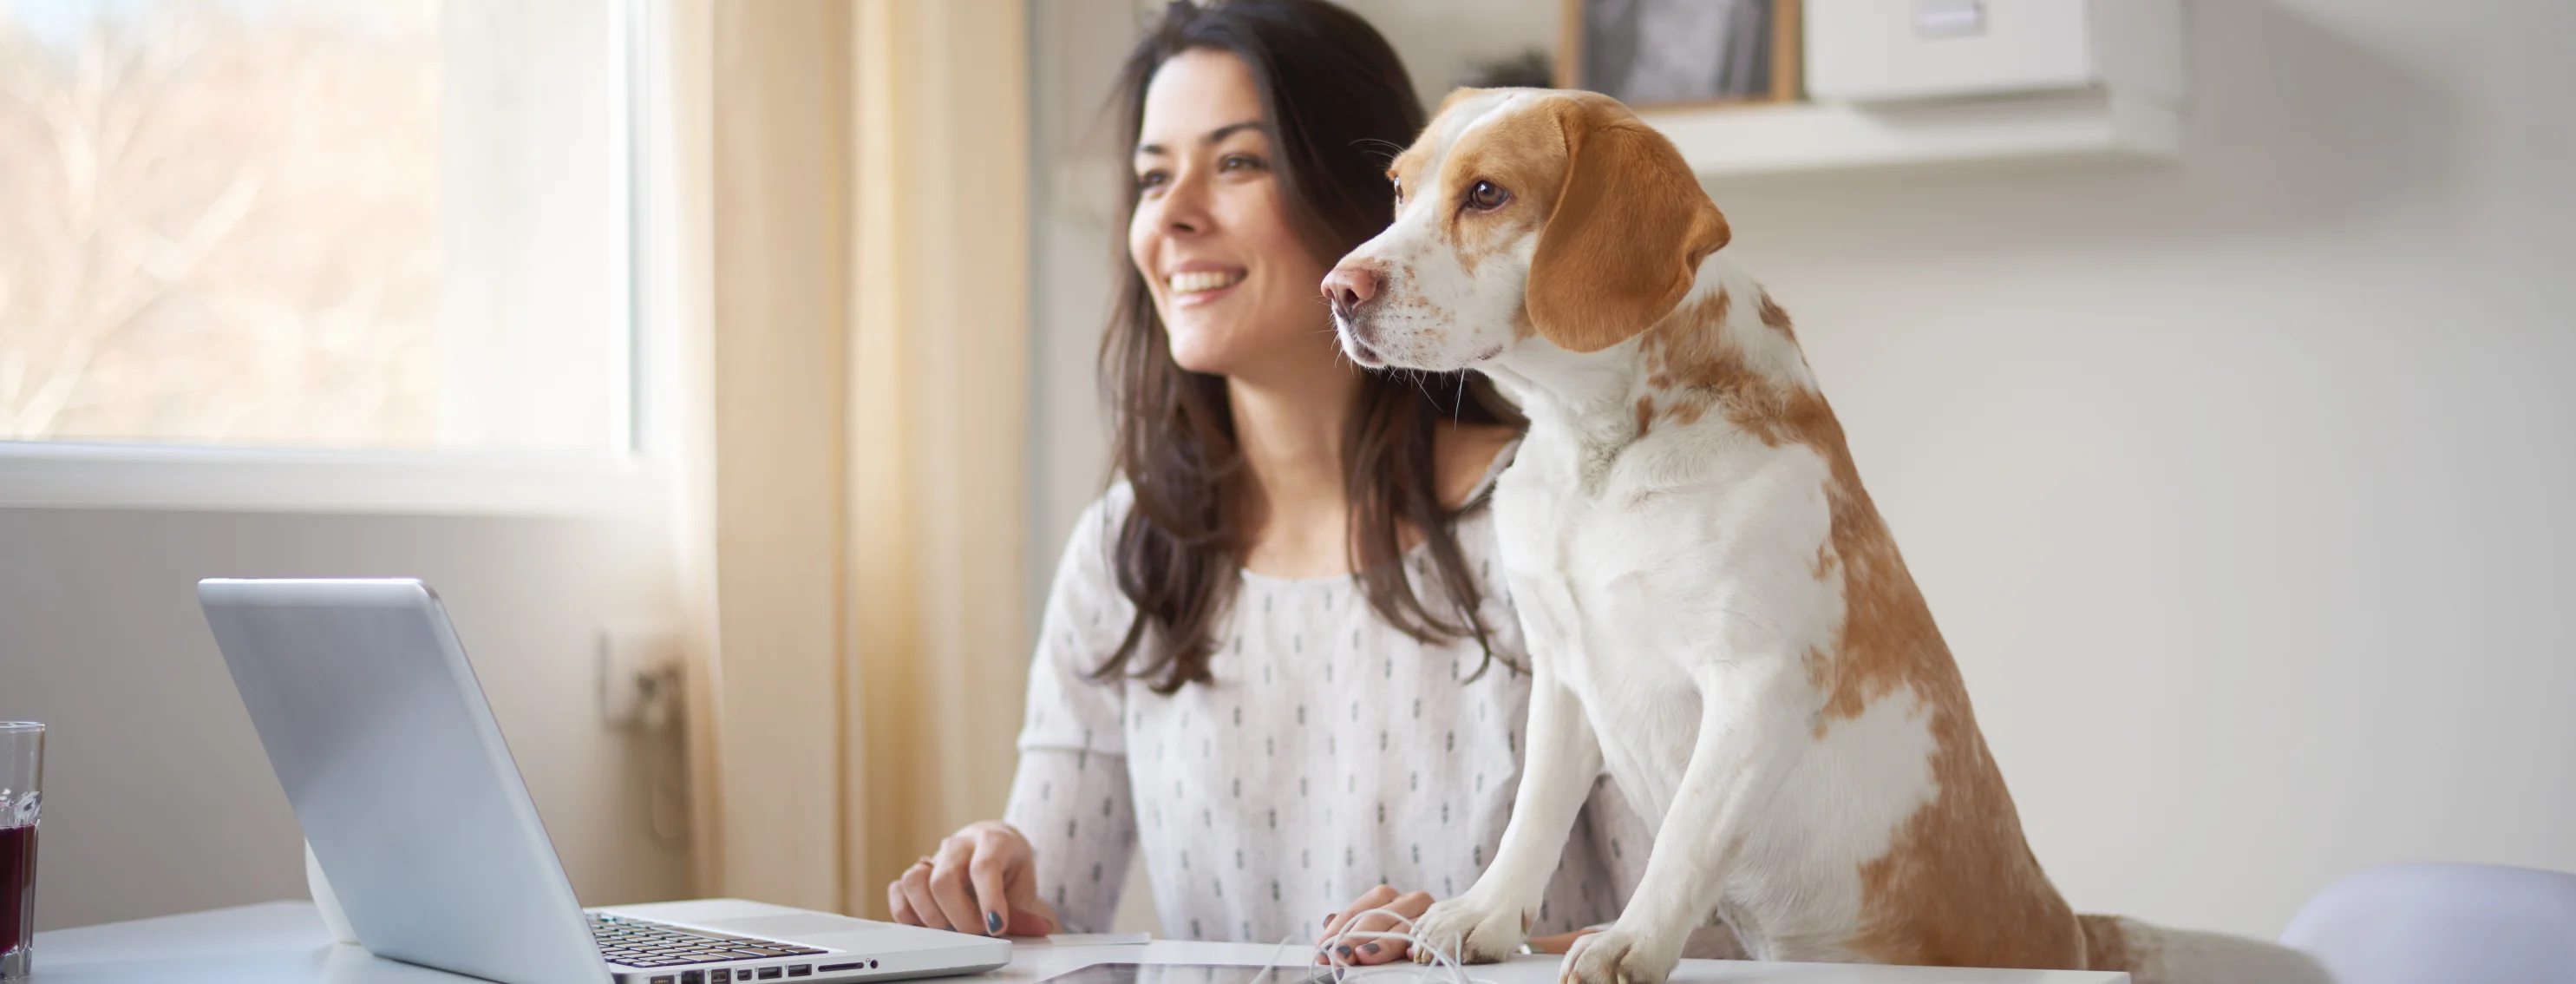 Woman and dog sitting at desk looking at laptop